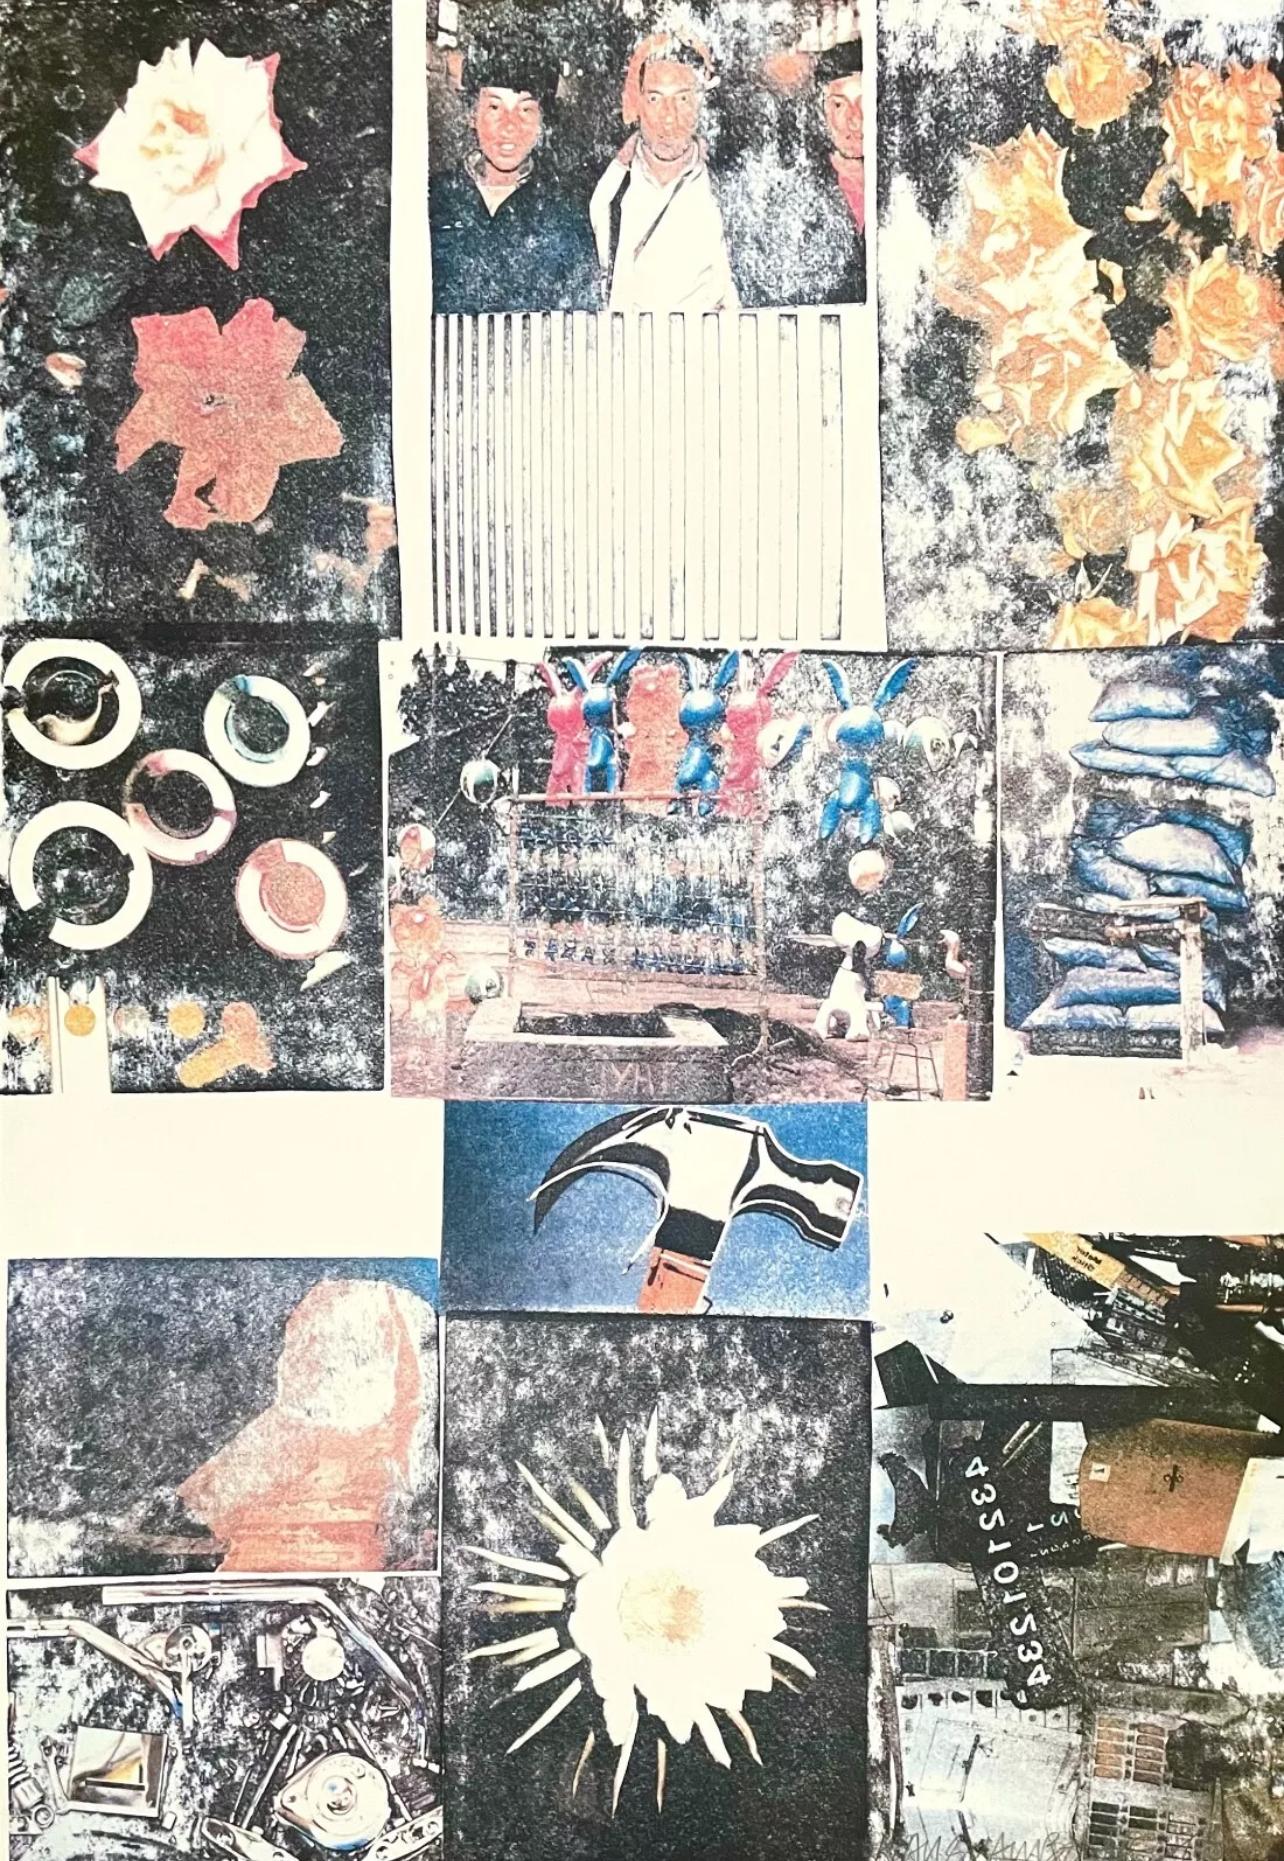 Artist: Robert Rauschenberg (1925-2008)
Title: Charms against harms
Year: 1993
Medium: Lithograph on wove paper
Edition: H.C. 8/15, 100, plus proofs
Size: 40.5 x 28 inches
Condition: Excellent
Inscription: Signed and numbered by the artist
Notes: